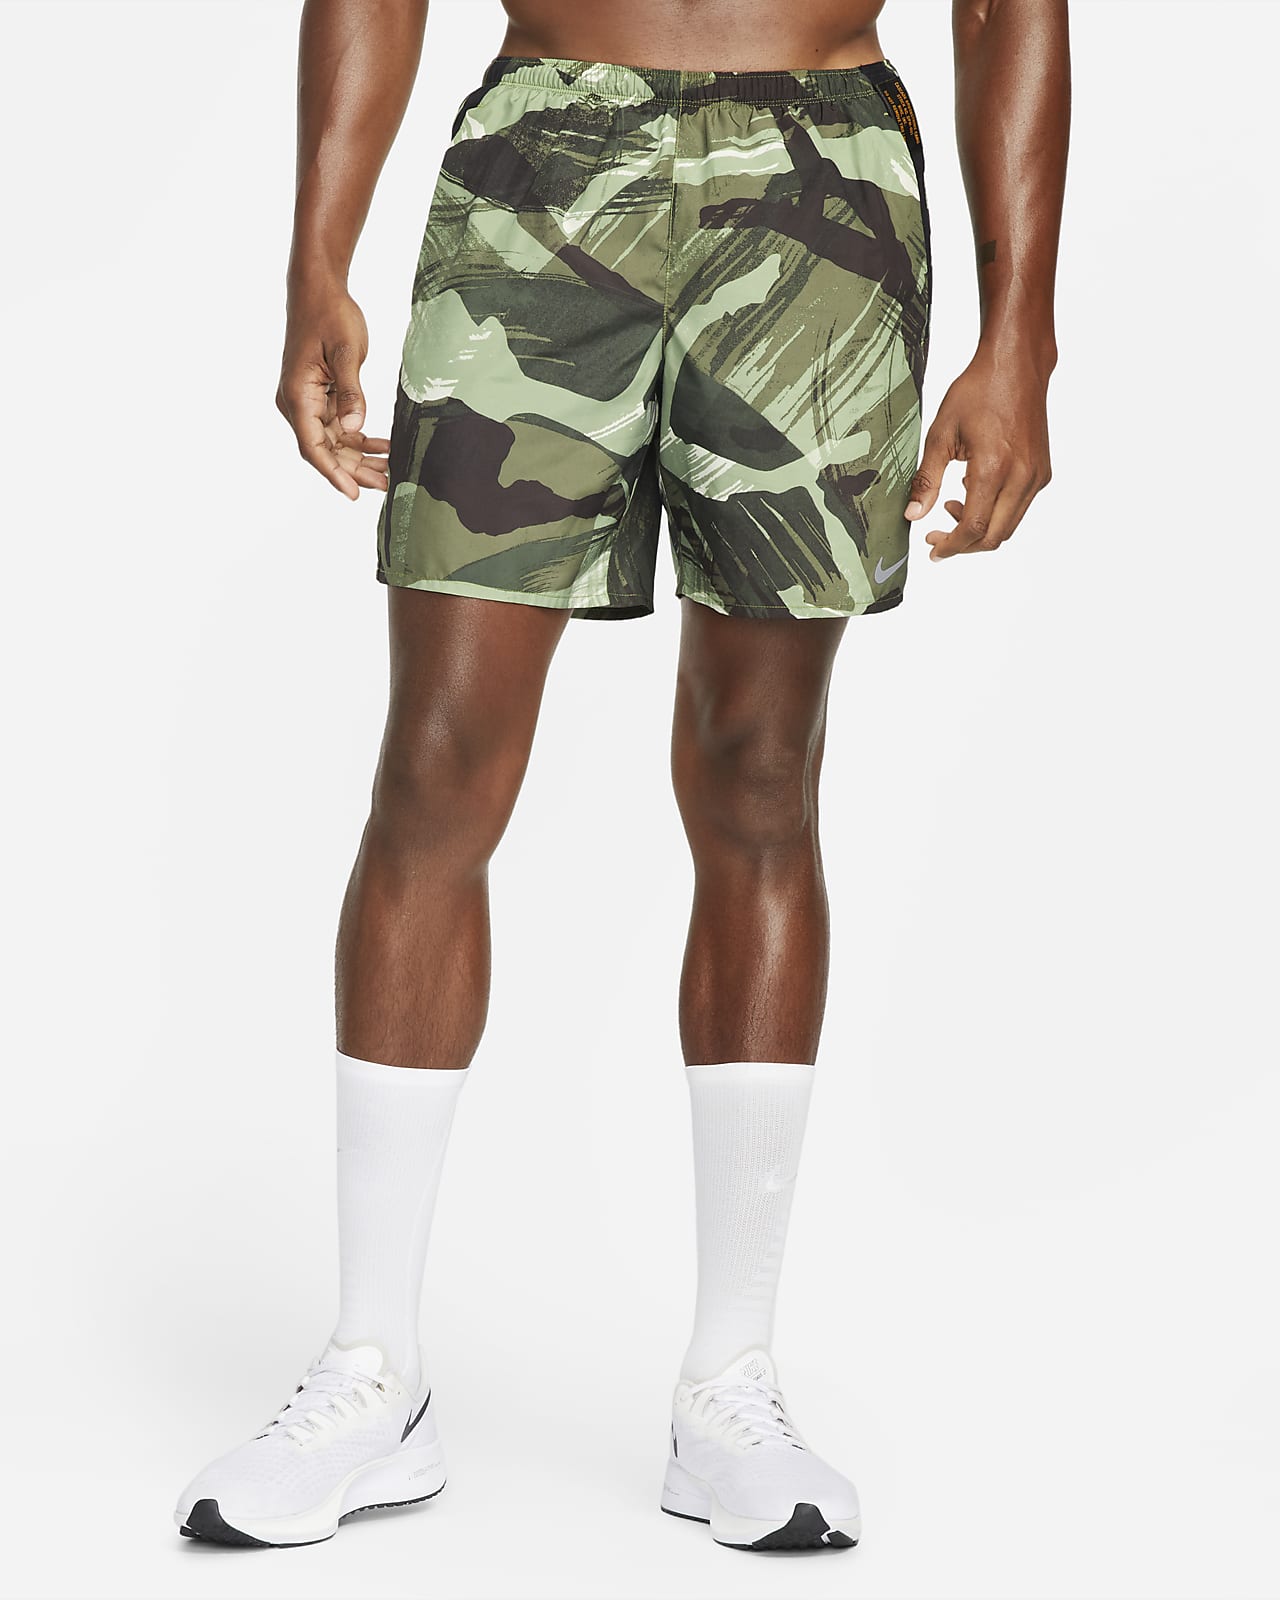 Nike Challenger Men's 18cm (approx.) Brief-Lined Camo Running Shorts